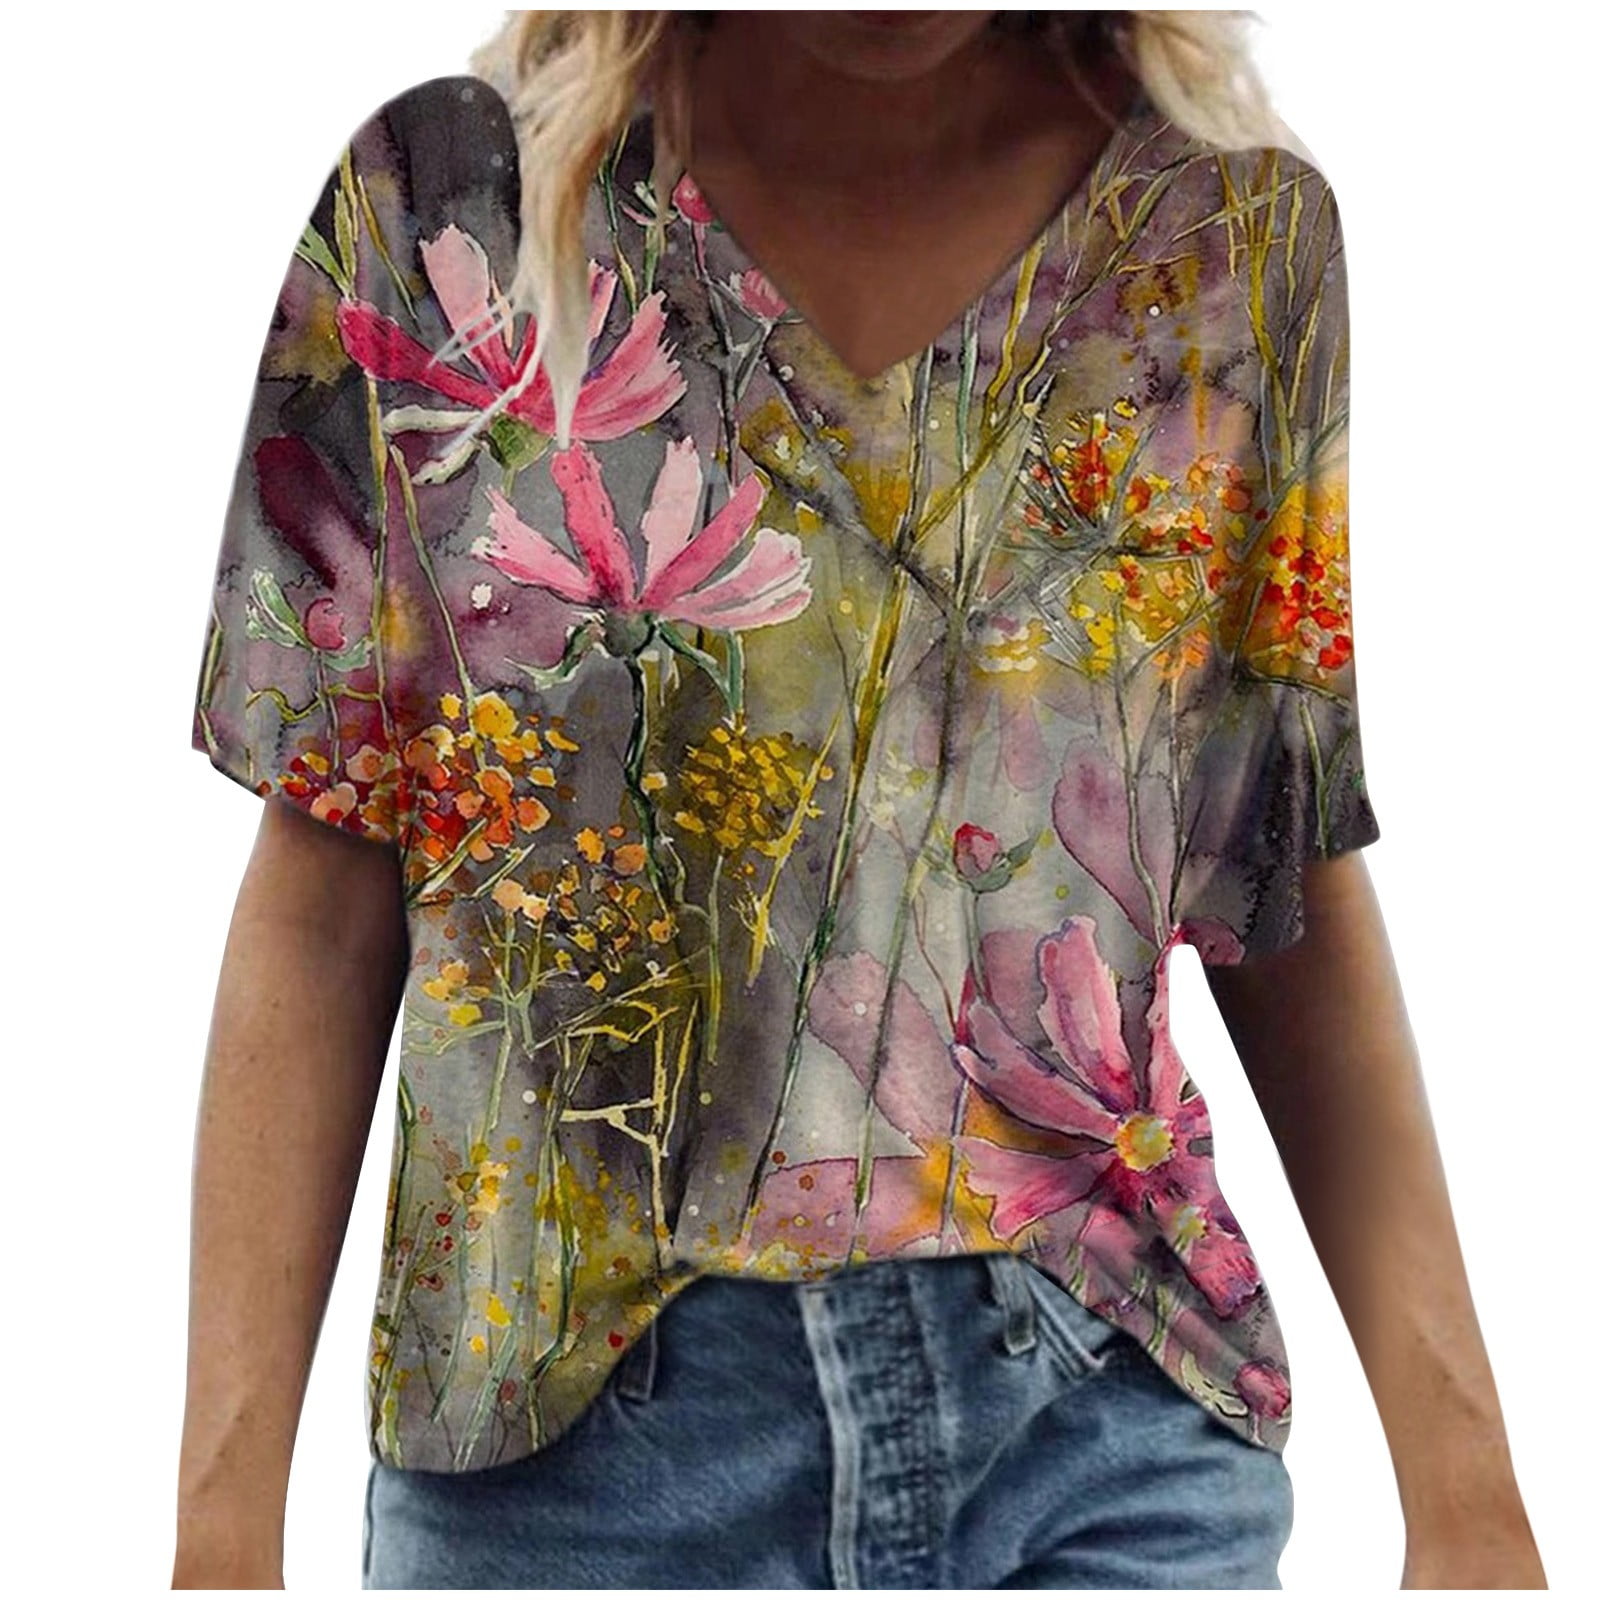 Summer Savings Clearance!qucoqpe Womens Tops Dressy, Colorful Retro Print  Shirt for Women Summer Short Sleeve Top Plus Size Pullover Lightweight V  Neck Tee on Clearance 